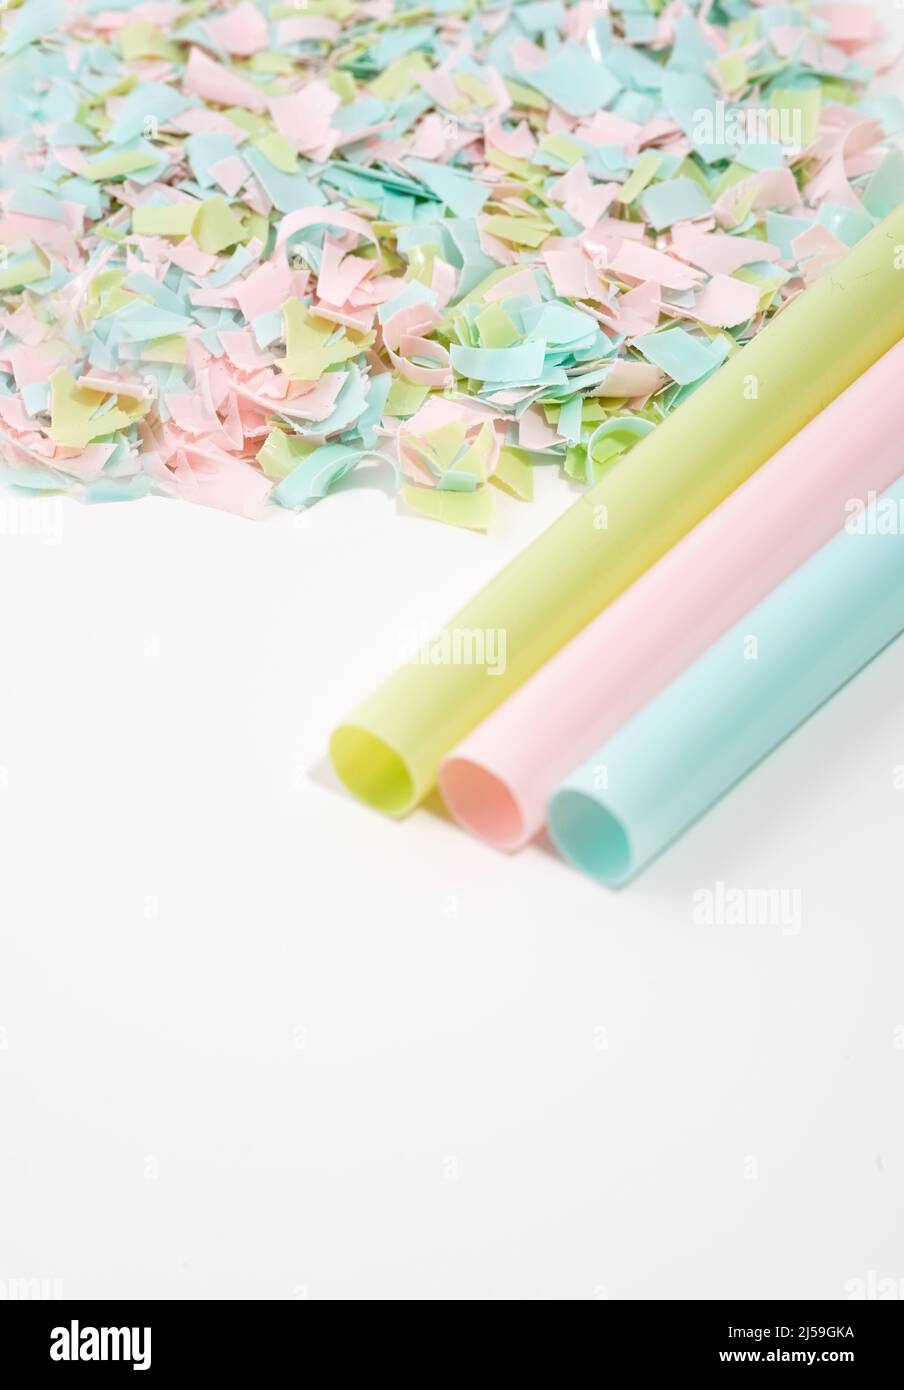 Drinking straws and microplastics on a white background. Impact of micro plastic on the food chain. Concept of environmental damage. Stock Photo